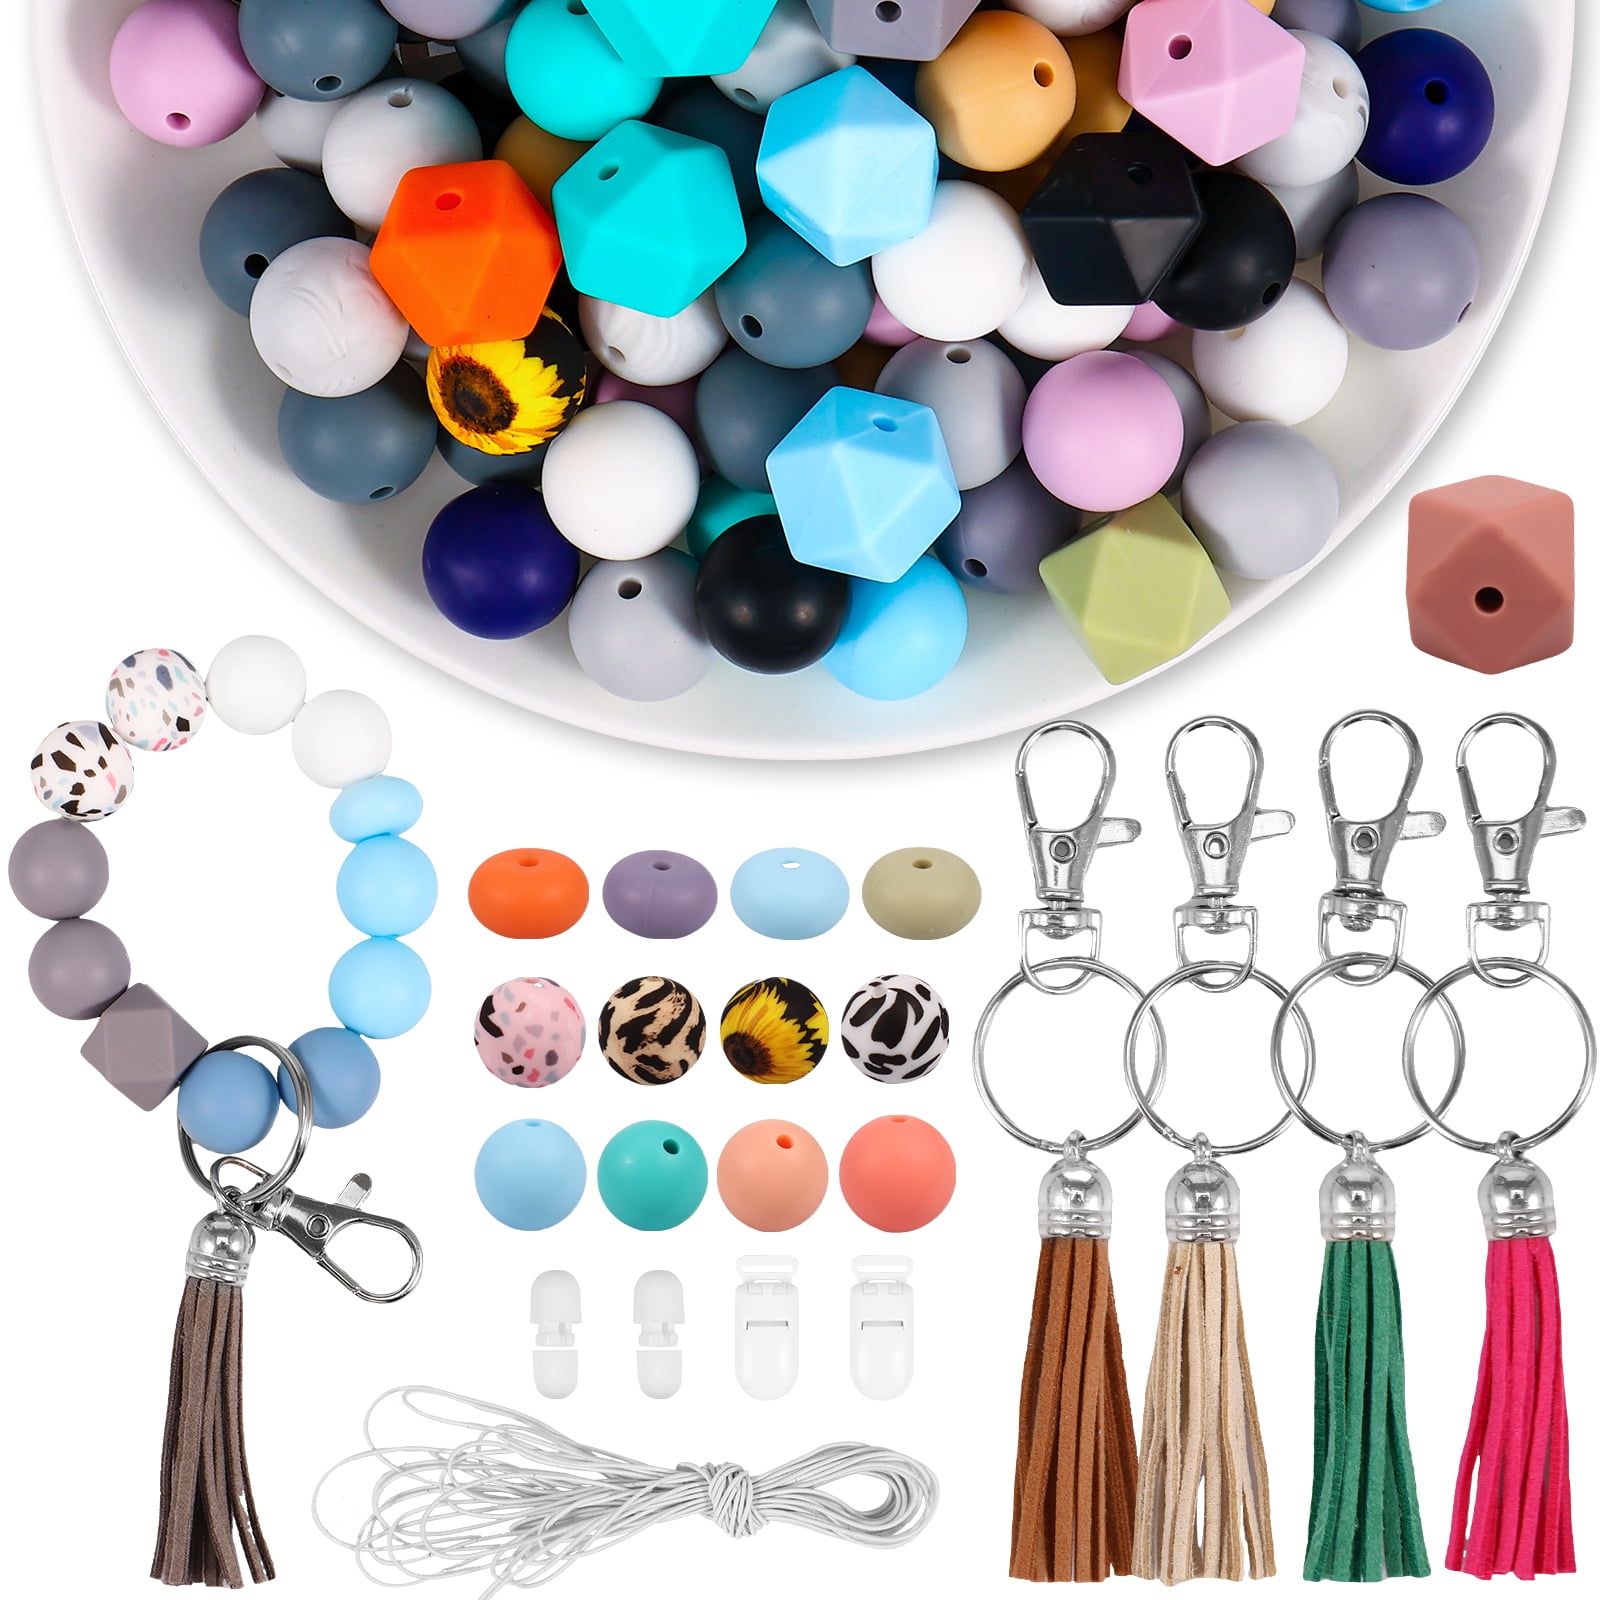 BOZUAN 120pcs Round Silicone Beads for Keychain Making Kit, Multiple Styles and Shapes Silicone Beads Bulk Rubber Beads for Keychains Making